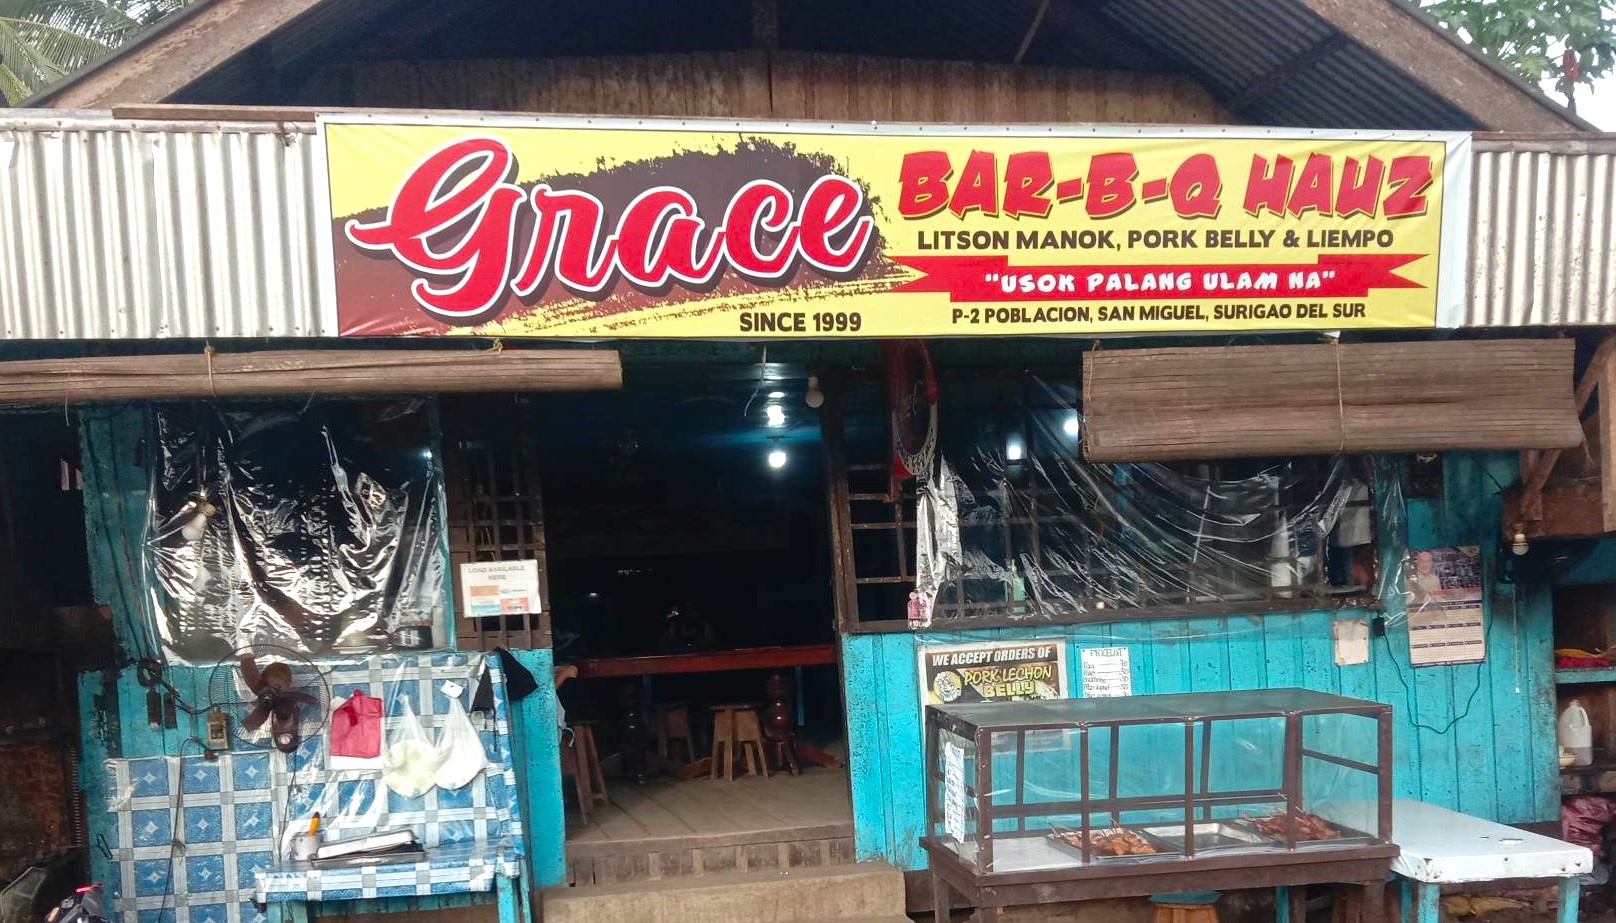 <b class="font-bara"><i class="bi bi-geo-fill h4"></i> GRACE BAR-B-Q HAUZ</b> <br/>The Grace Bb-Q Hauz is one the most delicious food Haus in Poblacion, San Miguel, Surigao del Sur.  There tagline is " USOK PALANG ULAM NA'' they offer Litson Manok, Pork Belly and Liempo and many more.